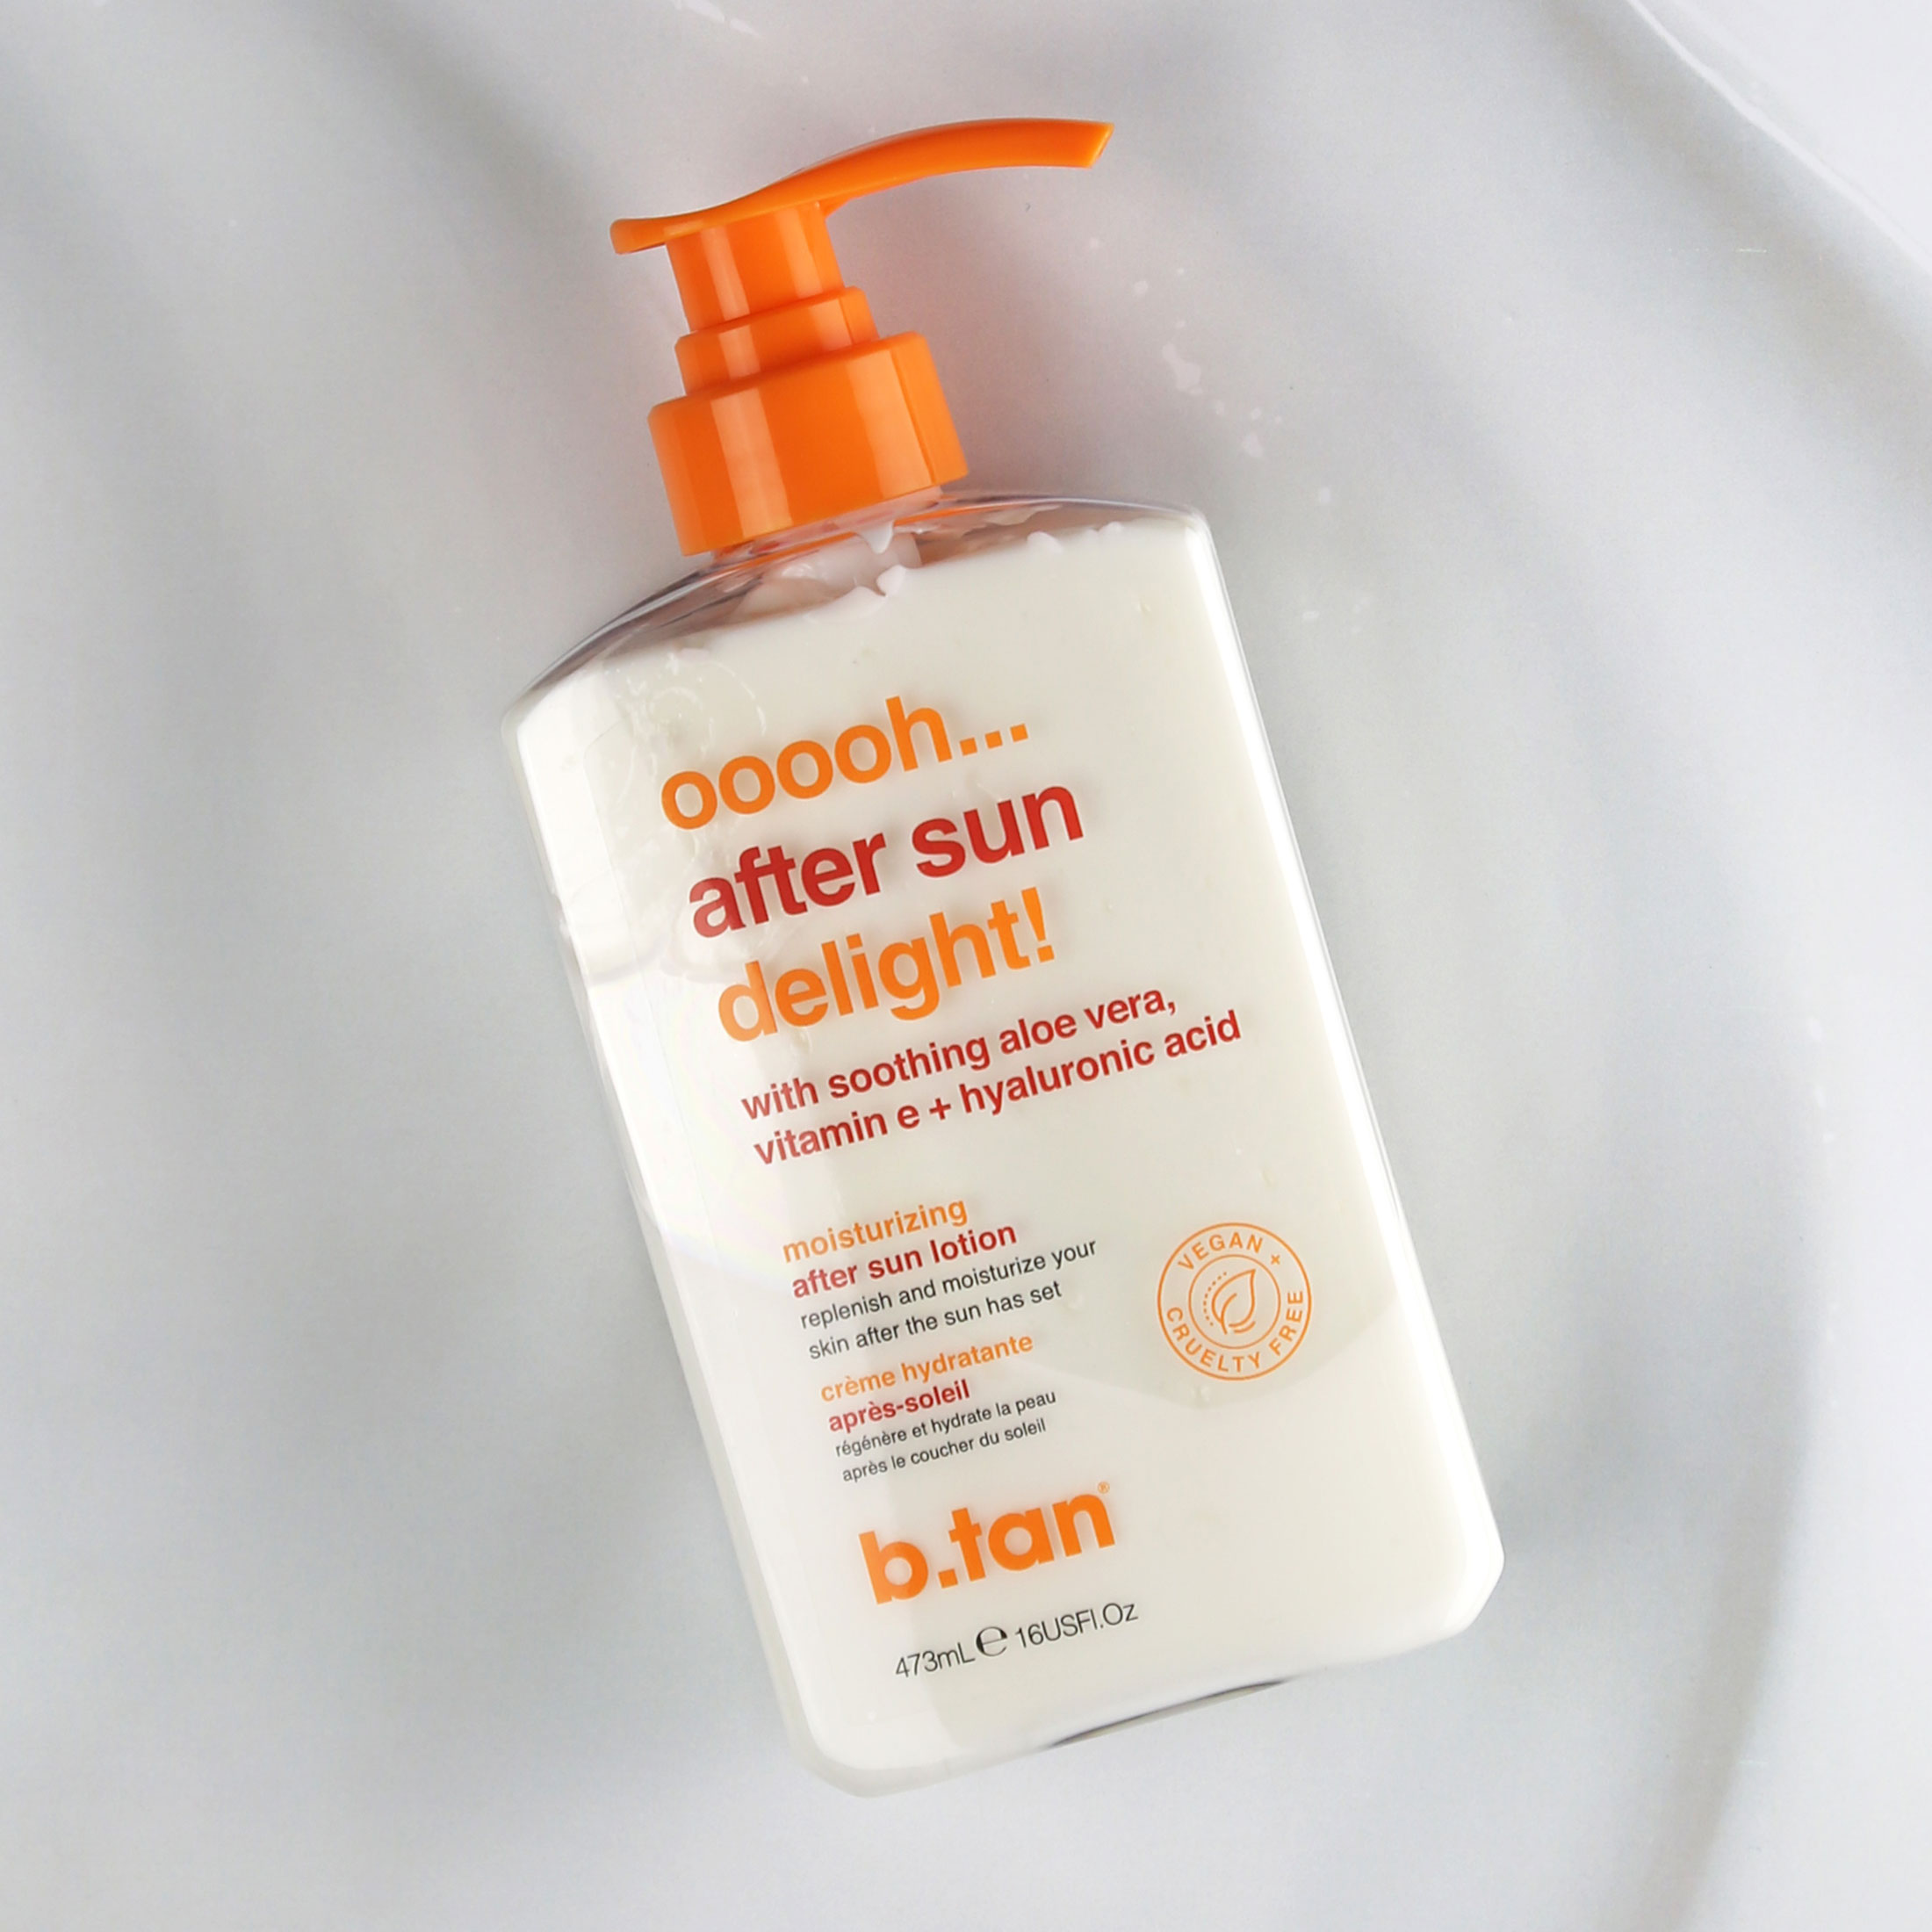 b.tan ooooh aftersun delight - aftersun lotion, 16 fl oz - image 4 of 5